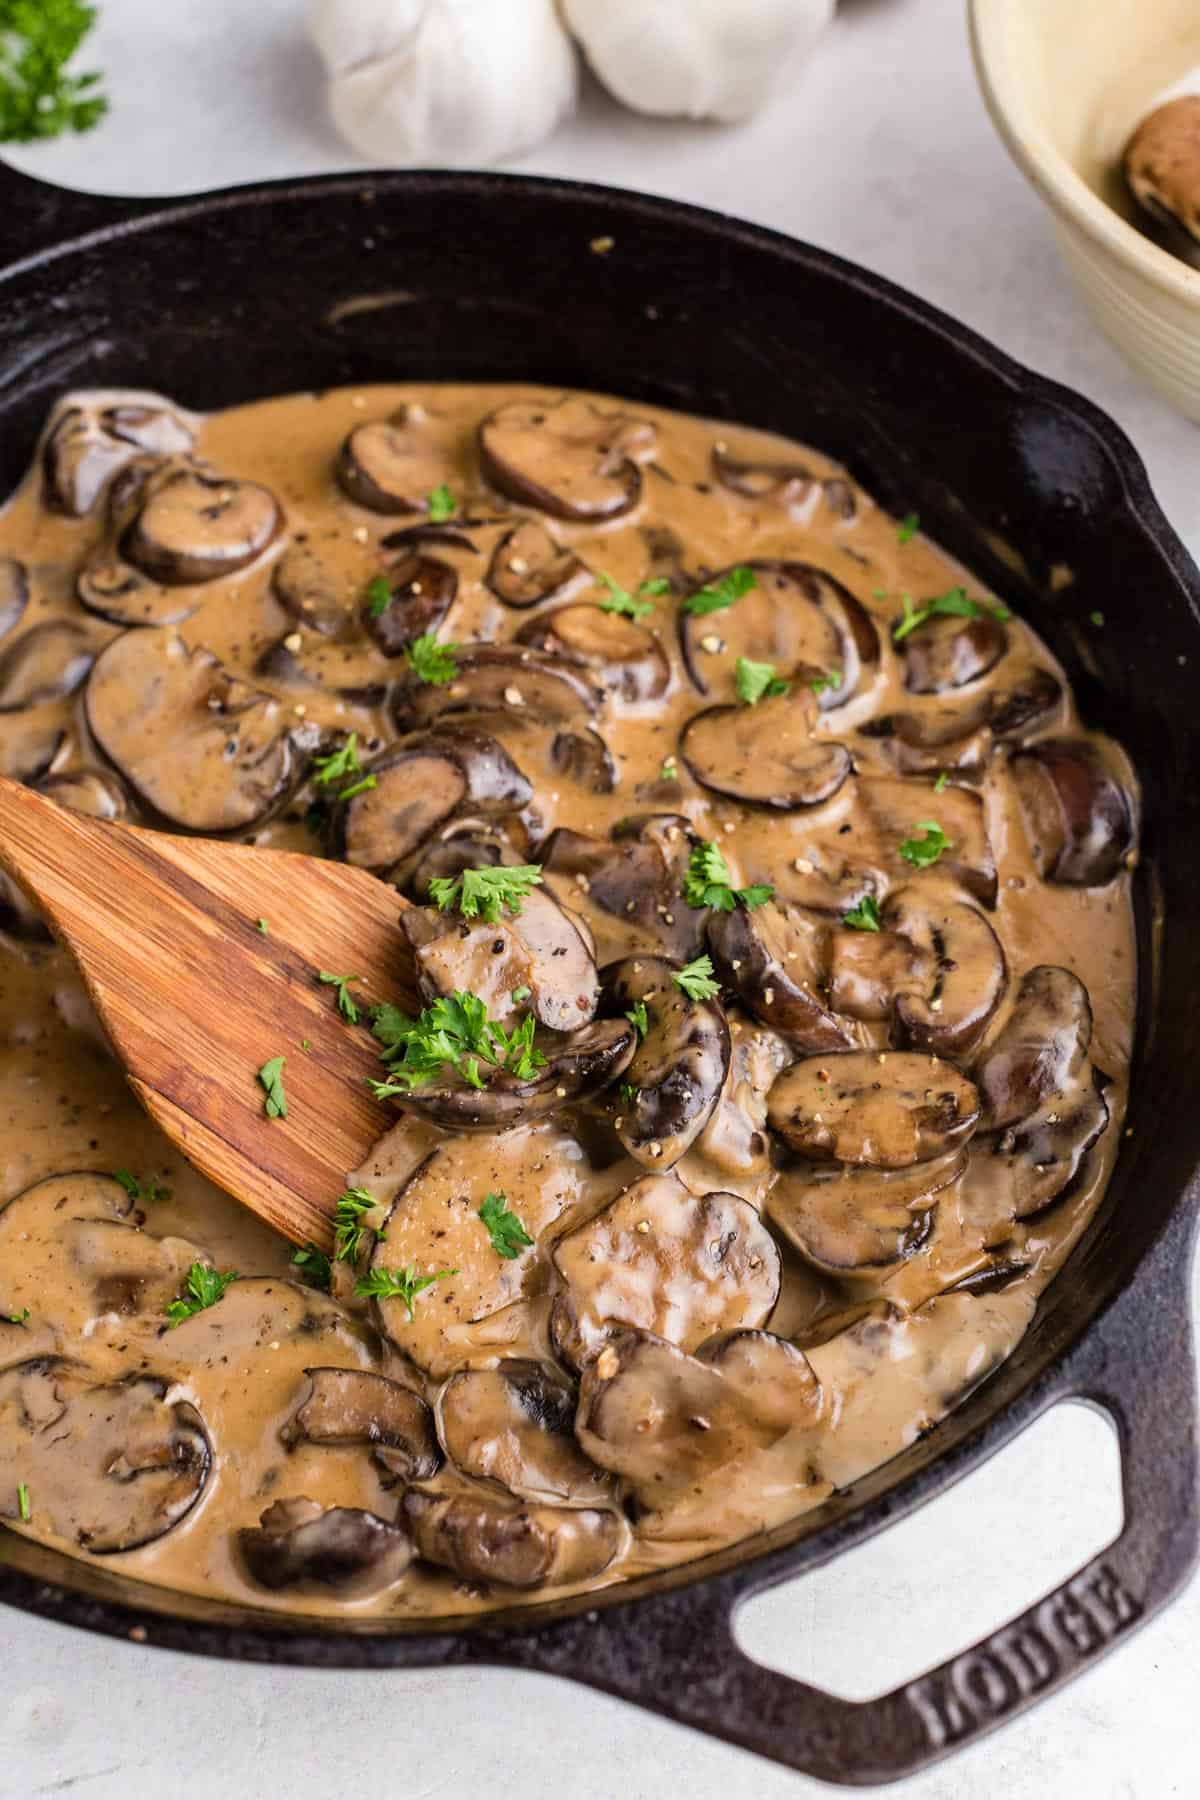 A skillet with creamy mushroom sauce and parsley.